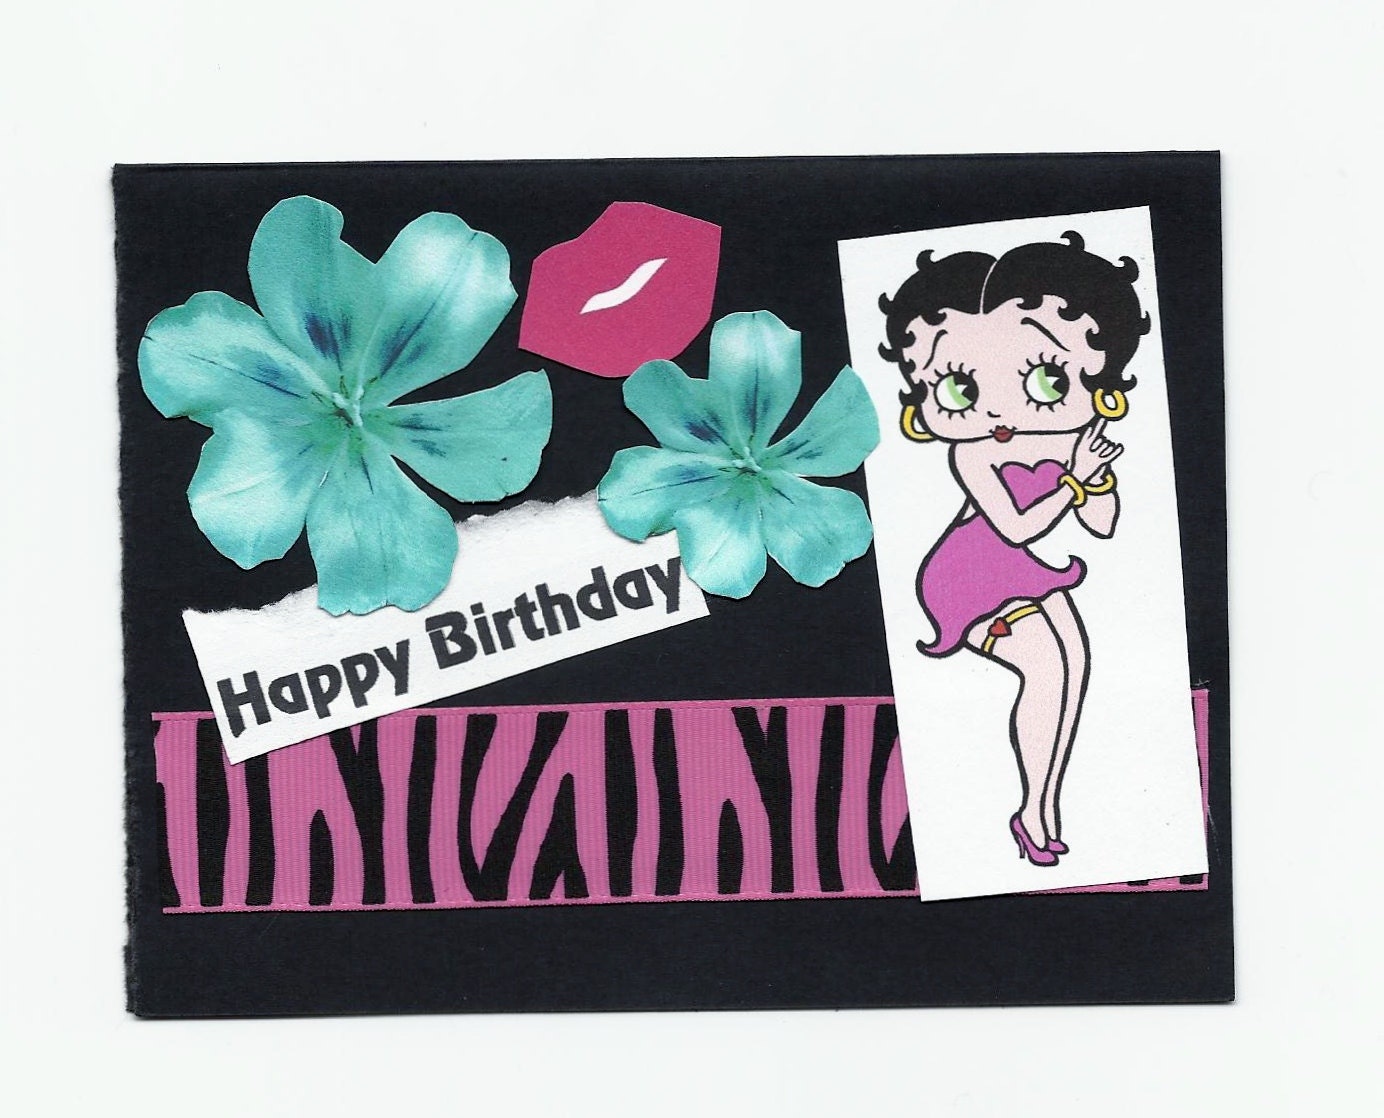 betty boop says